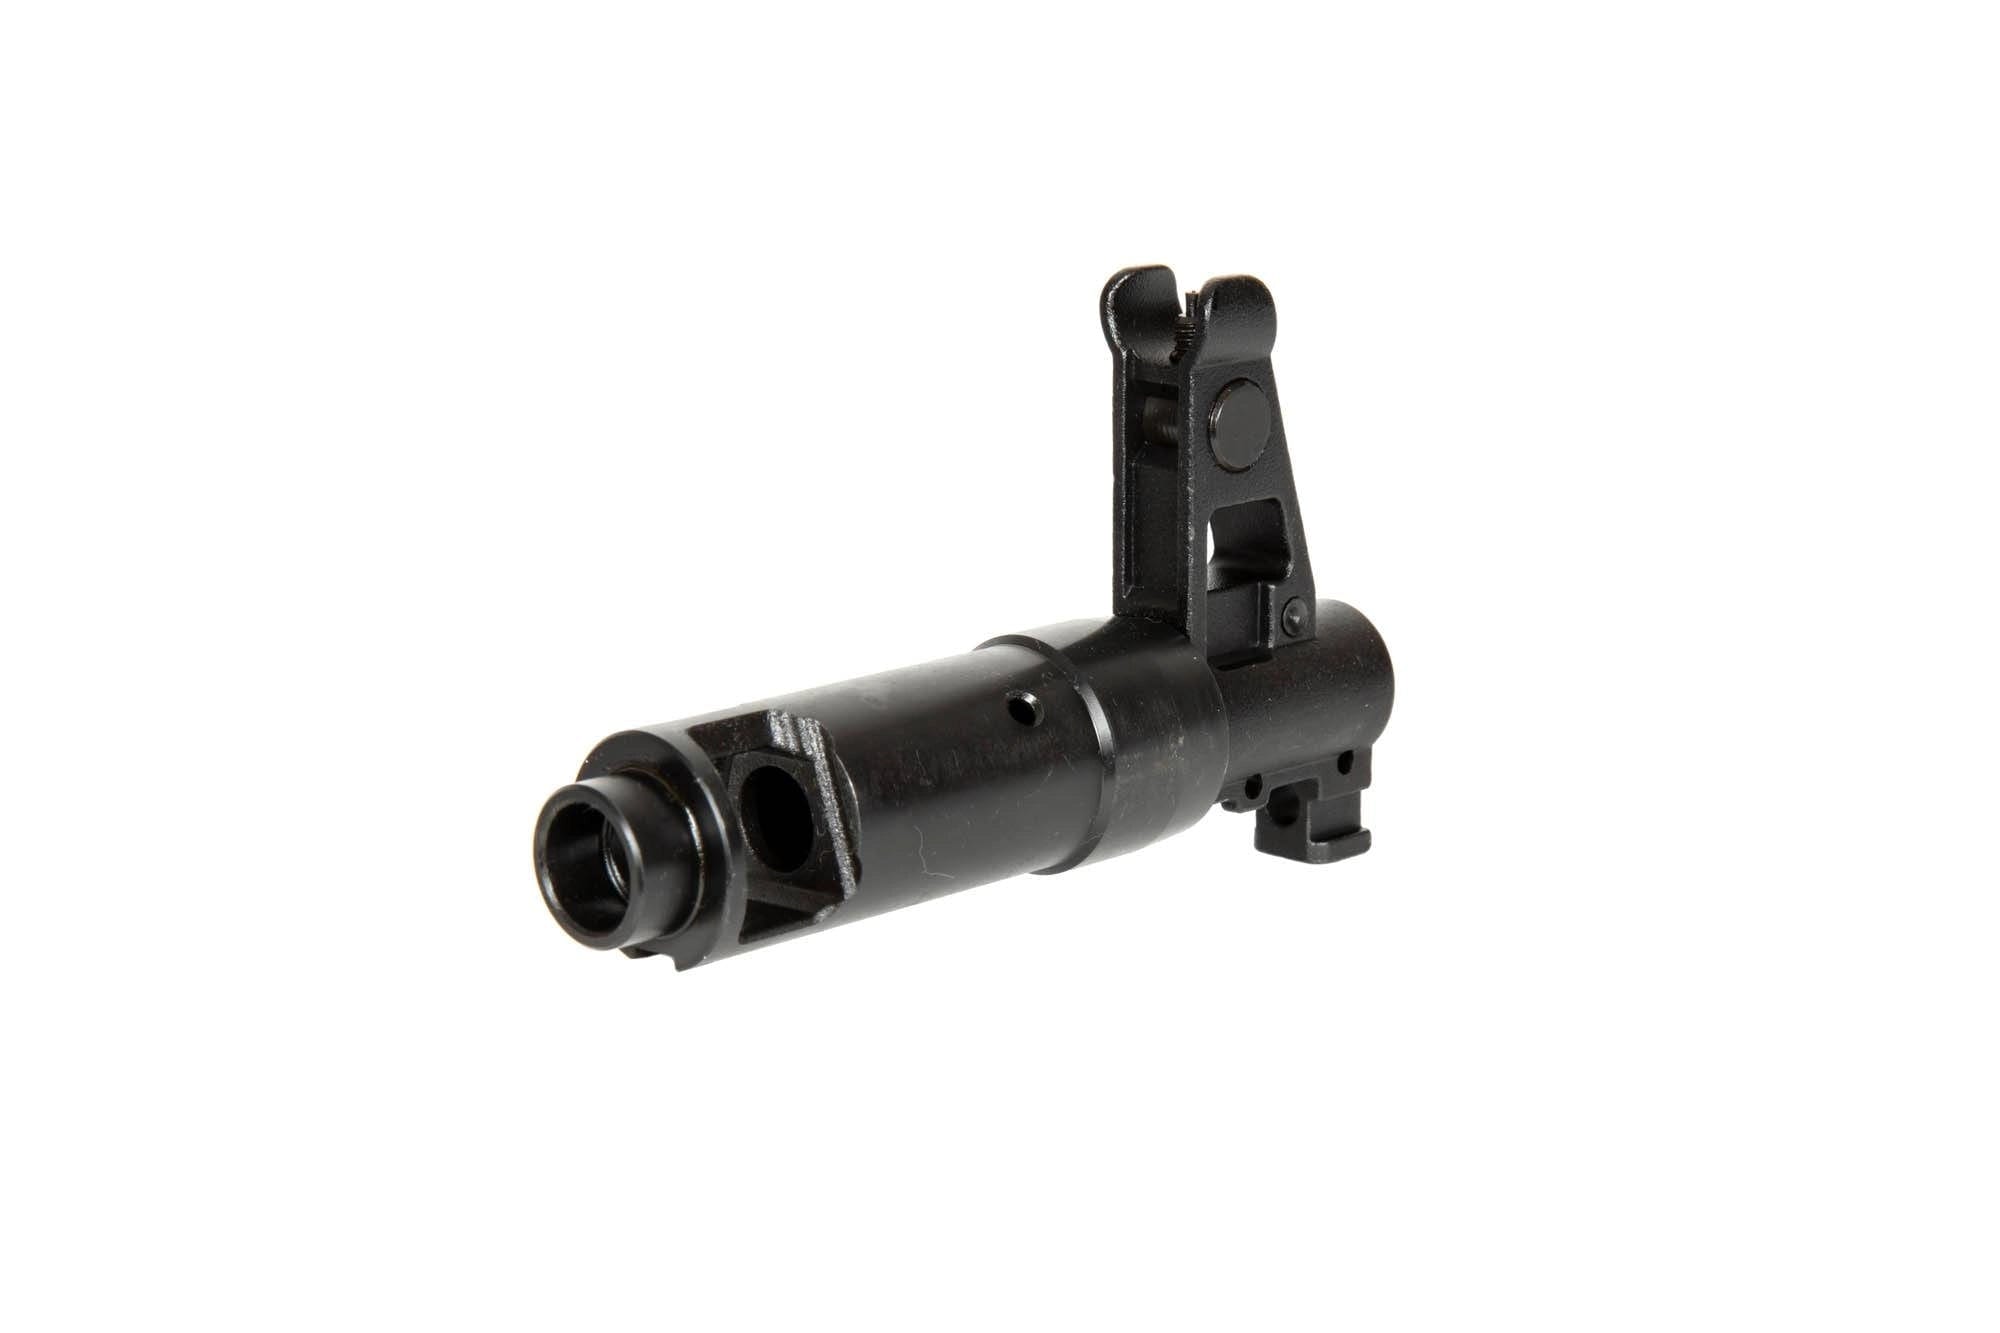 Steel front sight block & muzzle brake for LCK74